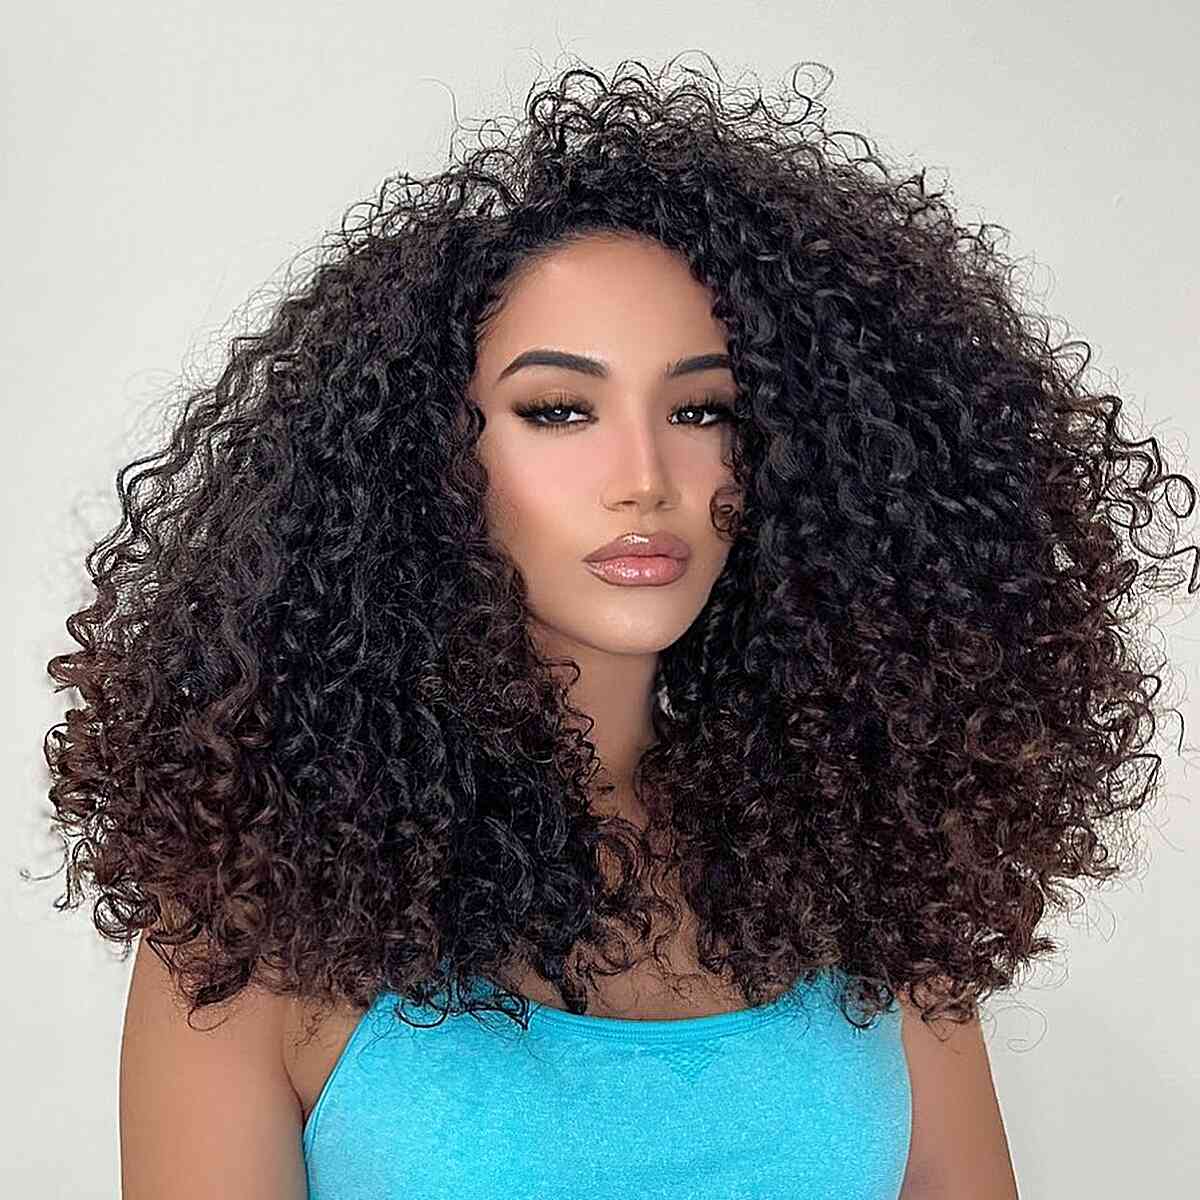 Full and Voluminous Rezo Cut Curls for African-American Women with Long Curly Hair